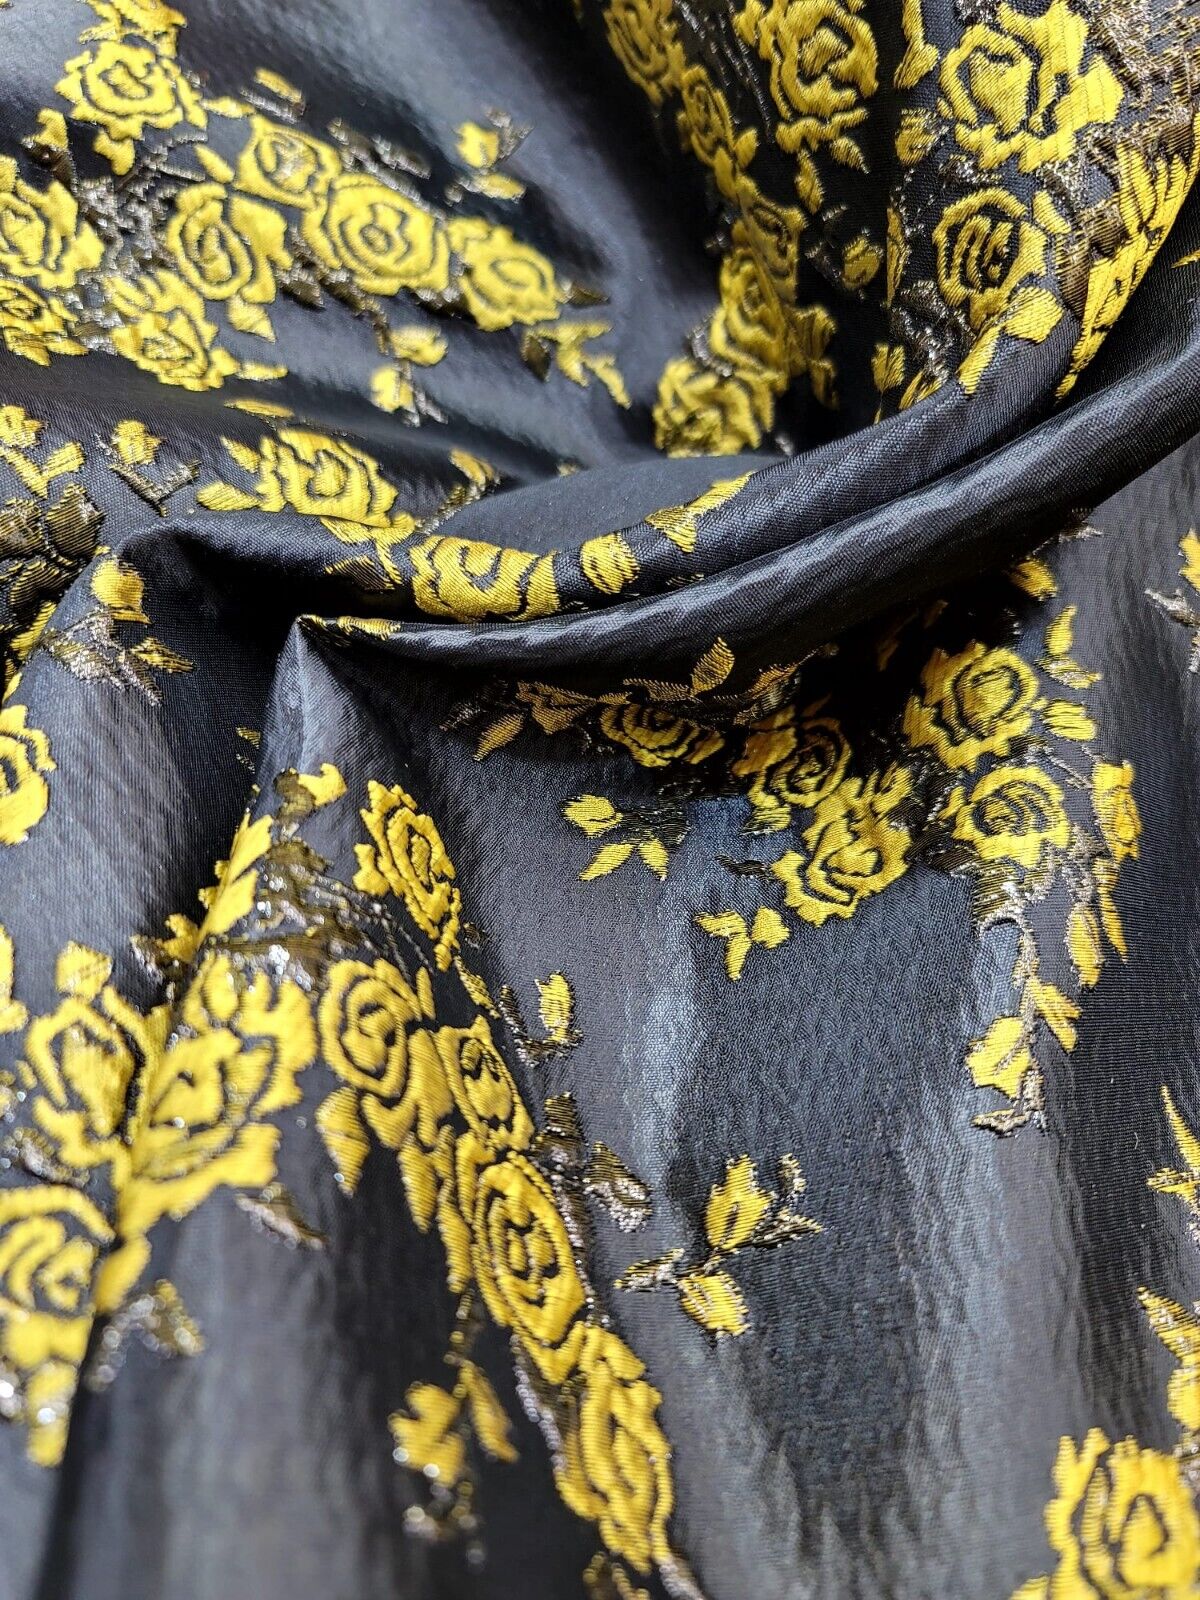 YELLOW Floral Black Brocade Fabric - By the Yard